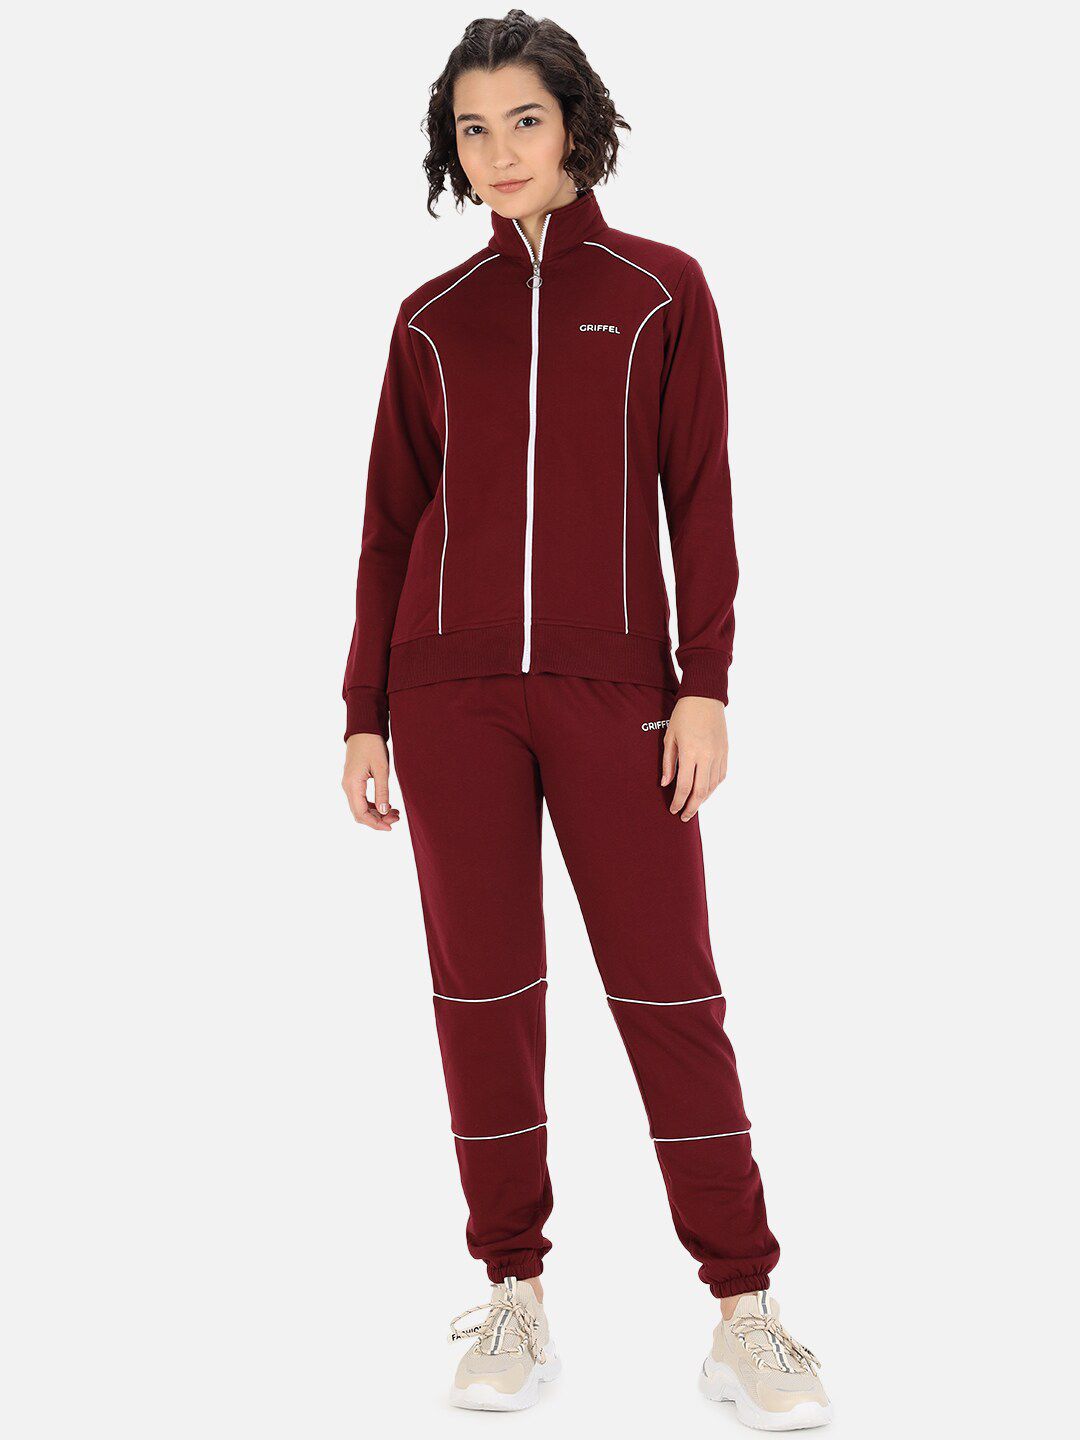 GRIFFEL Women Maroon Solid Sports Tracksuit Price in India